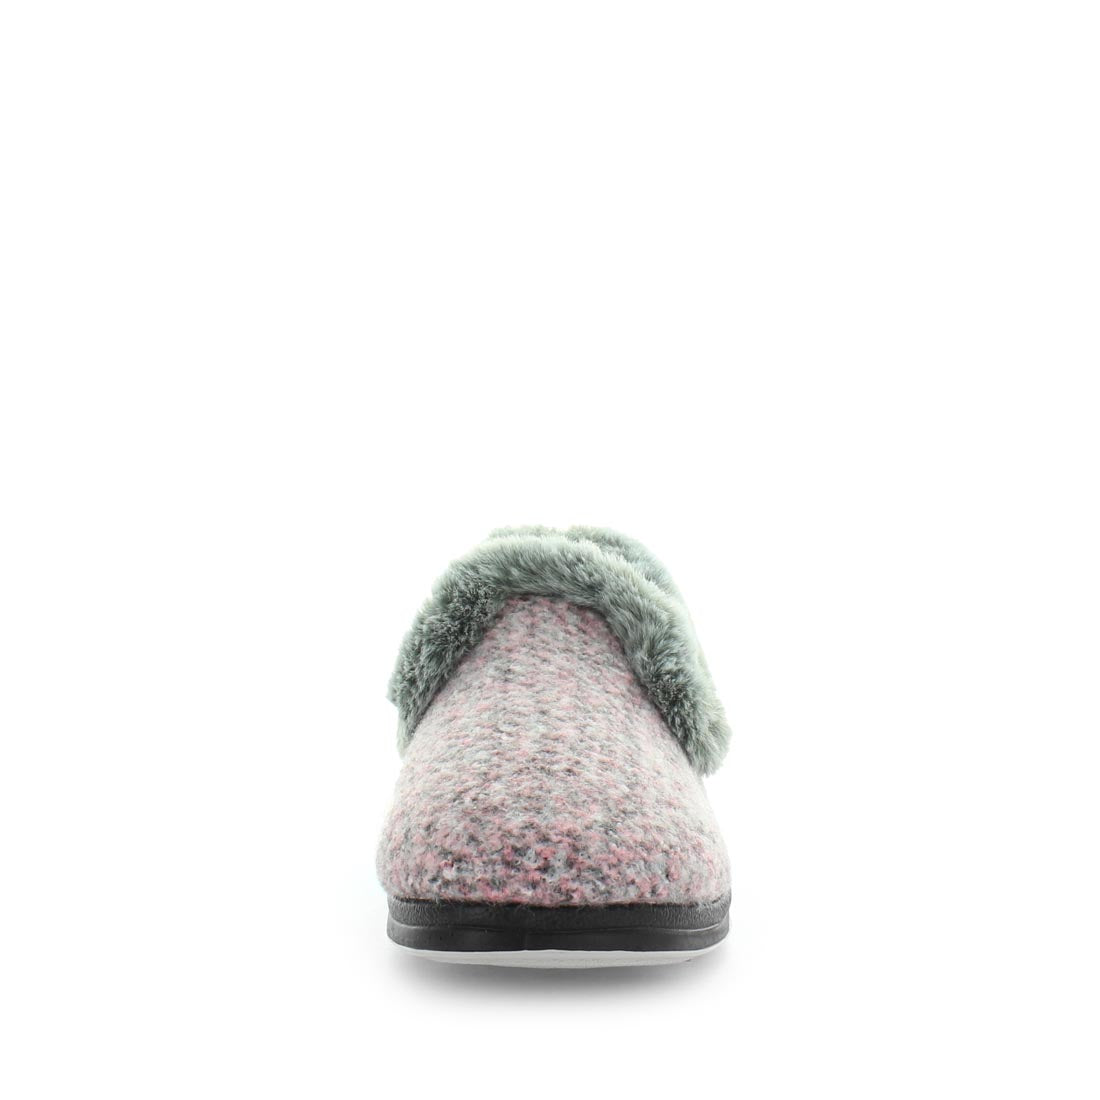 Classic womens slip on slipper, Emille by panda slippers. A pink slipper made with soft materials and comfy fit design for the perfect indoor slipper. showing a non slip sole and micro terry trimming,